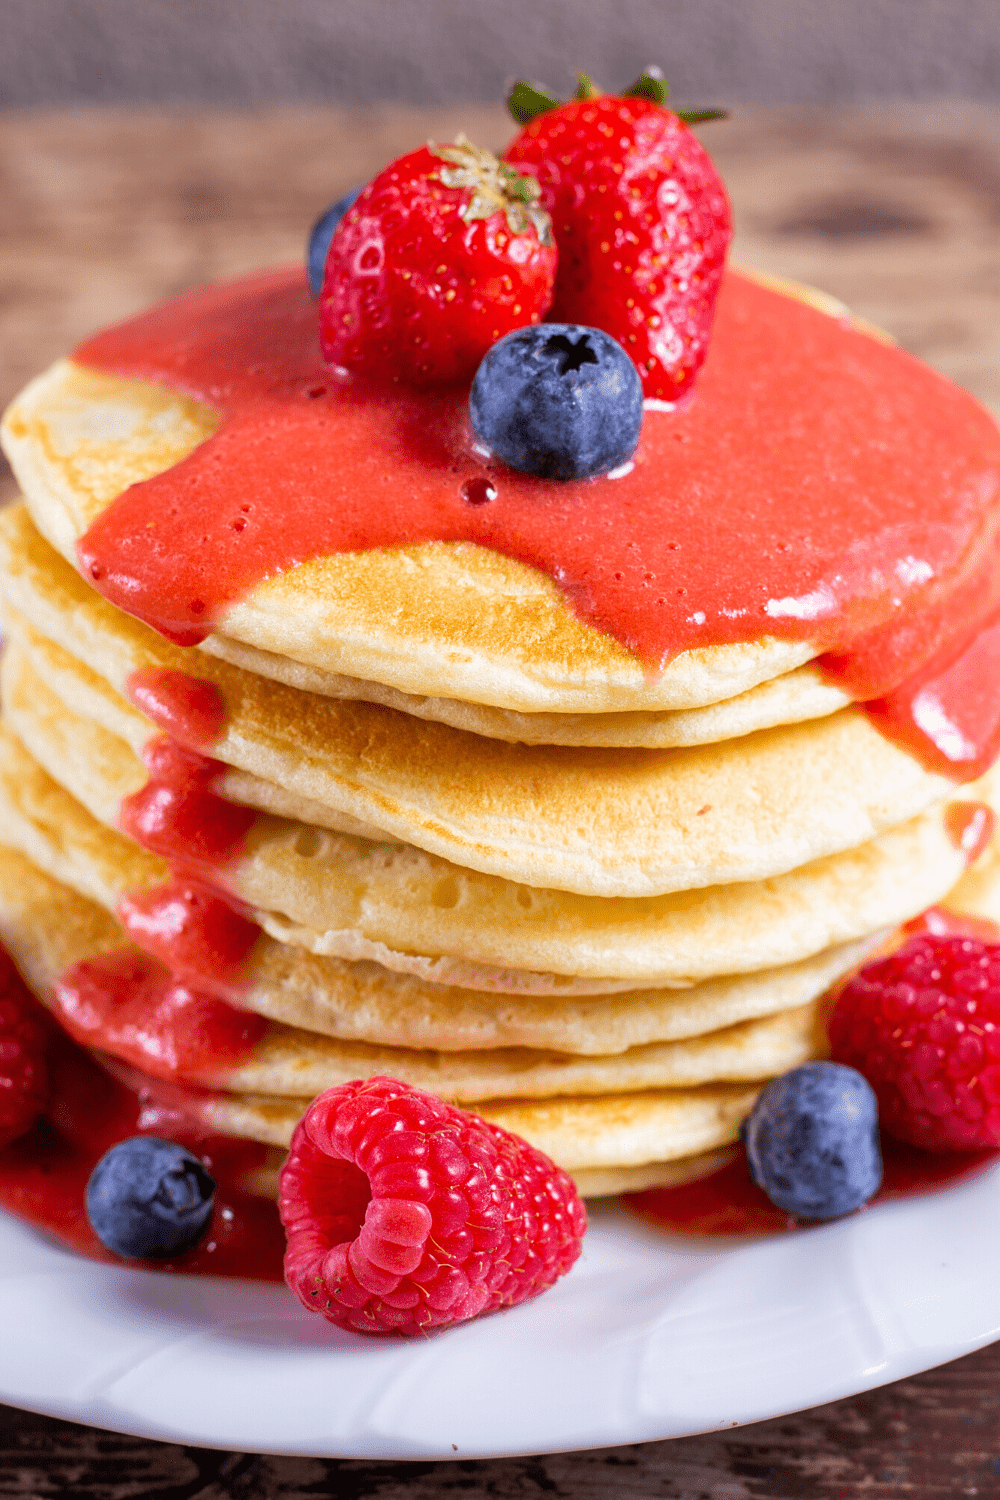 Homemade pancakes with syrup